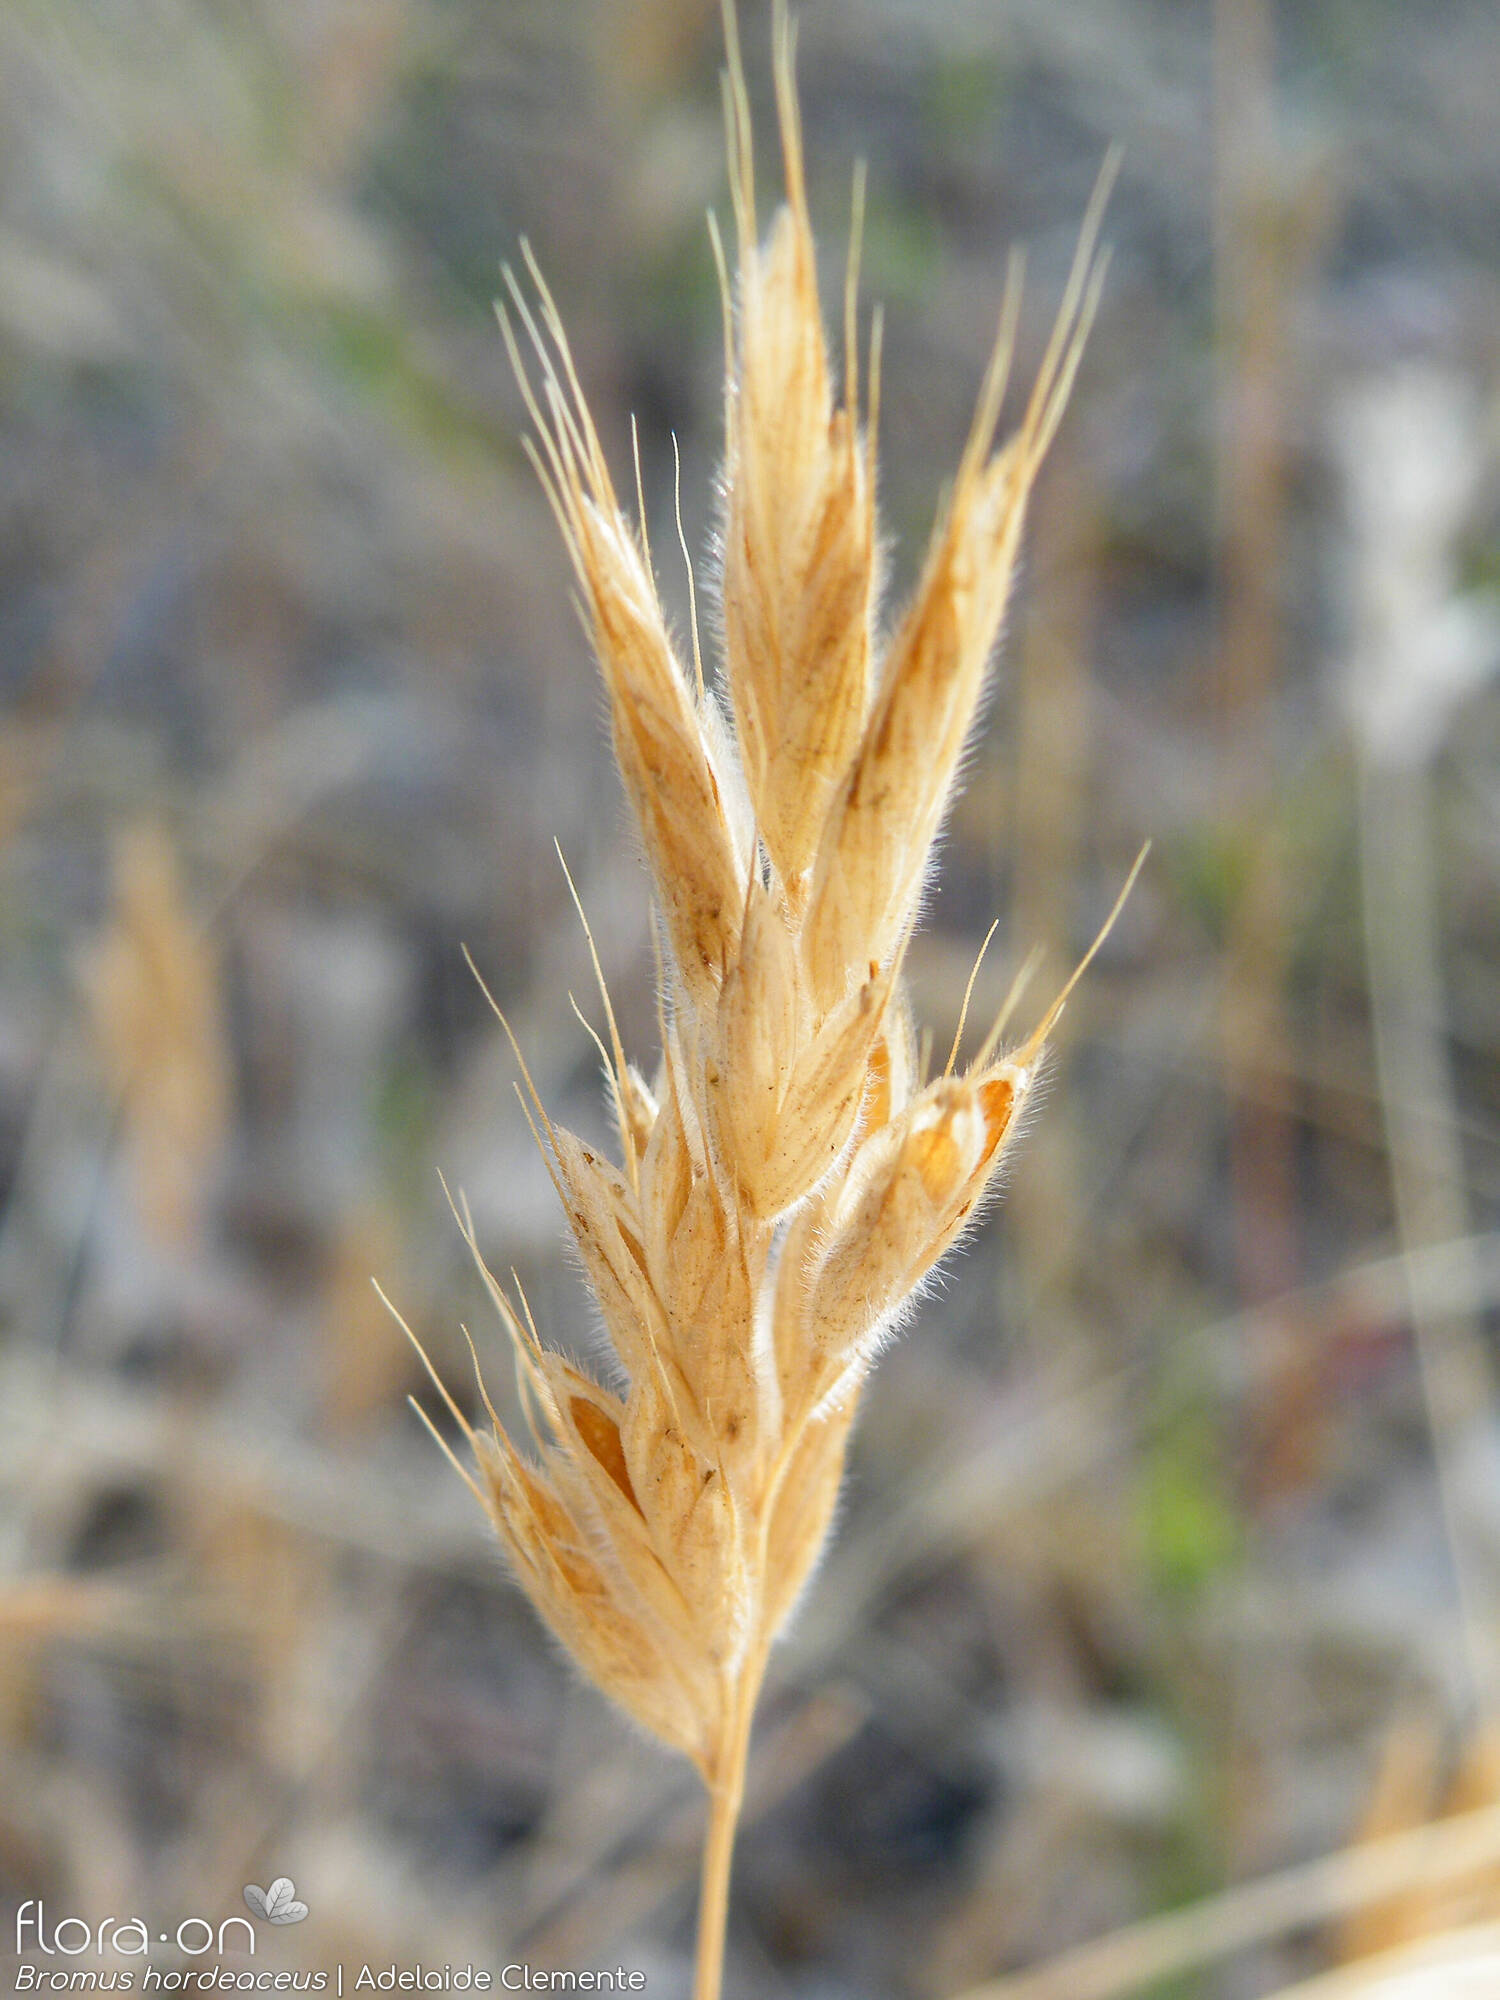 Bromus hordeaceus - Fruto | Adelaide Clemente; CC BY-NC 4.0